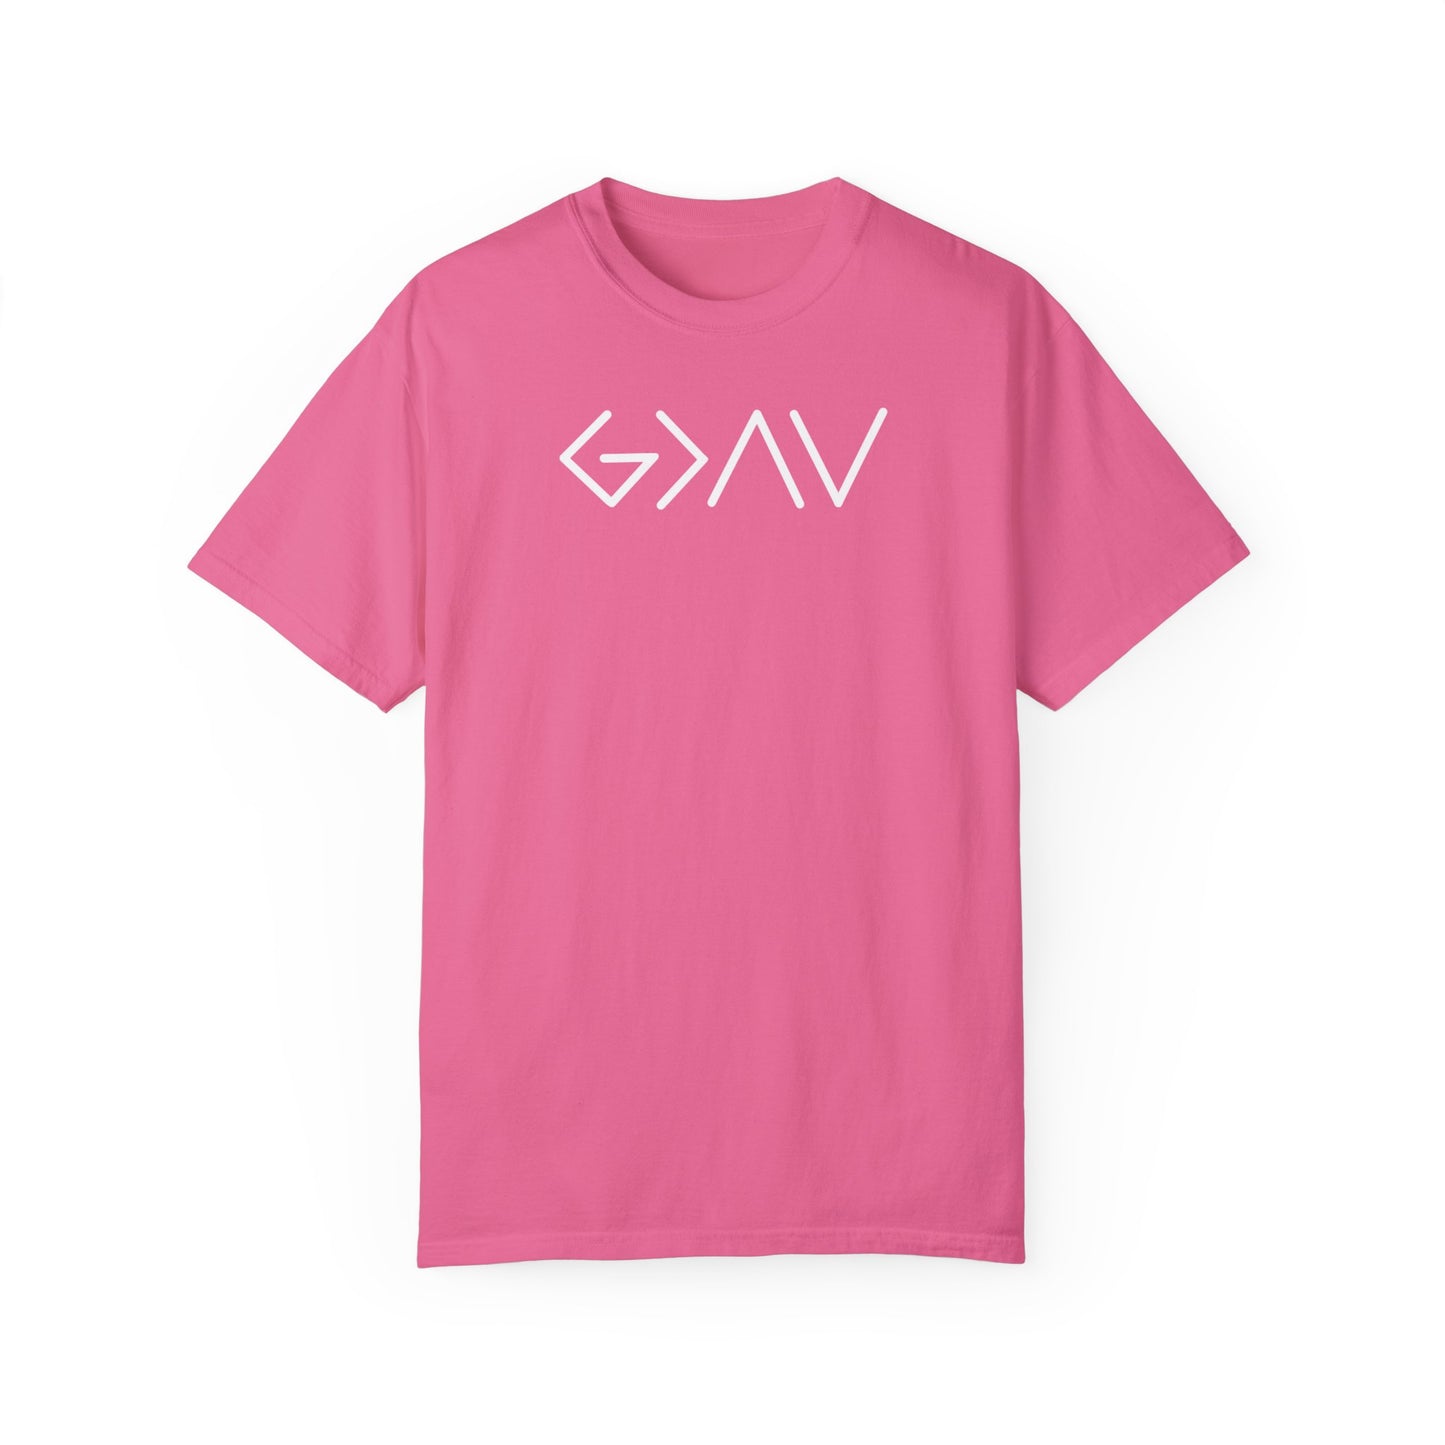 God is Greater Than the Highs and Lows Graphic T-Shirt Christian Shirts for Men Women Mental Health Gift for Friend Brother Father Mother